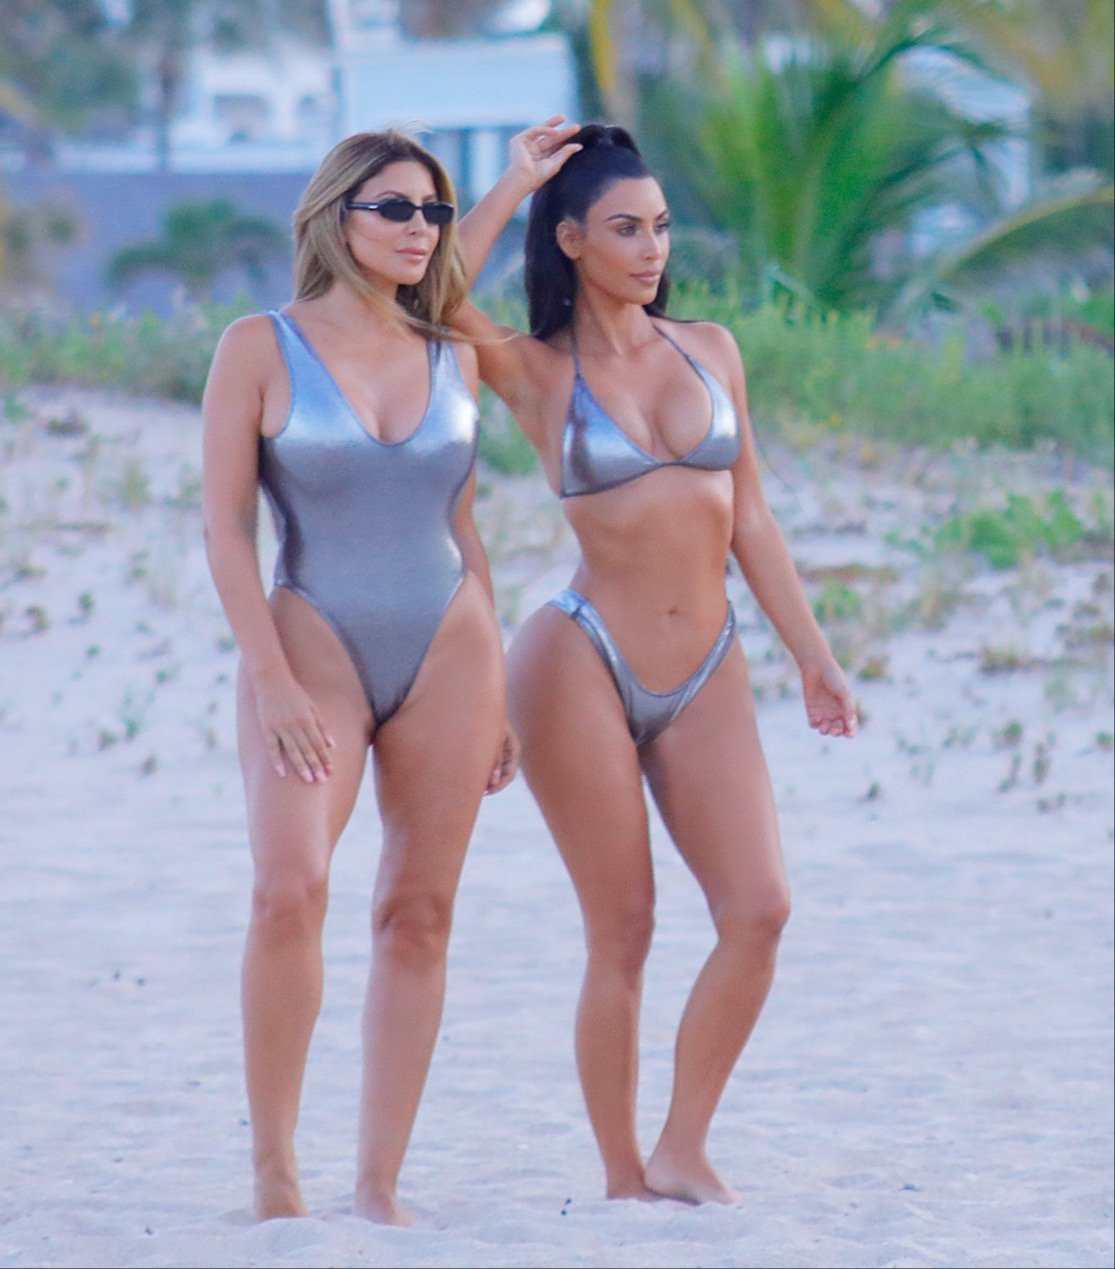 EXCLUSIVE: * EMBARGO: Strictly No Web / Online Permitted Before 9am BST 20th Aug 2018 * Fee For Online After 9am 500 GBP For Set * * Min Paper Print Fee 500 GBP PP * Premium Exclusive Kim Kardashian and Larsa Pippen seen wearing matching silver ʙικιɴι/swimsuit while on a pH๏τoshoot in MIami, FL Pictured: Kim Kardashian,Larsa Pippen Ref: SPL5016984 180818 EXCLUSIVE Picture by: AM / SplashNews.com * EMBARGO: Strictly No Web / Online Permitted Before 9am BST 20th Aug 2018 * Fee For Online After 9am 500 GBP For Set * * Min Paper Print Fee 500 GBP PP * Splash News and Pictures Los Angeles: 310-821-2666 New York: 212-619-2666 London: 0207 644 7656 Milan: +39 02 4399 8577 Sydney: +61 02 9240 7700 pH๏τodesk@splashnews.com World Rights